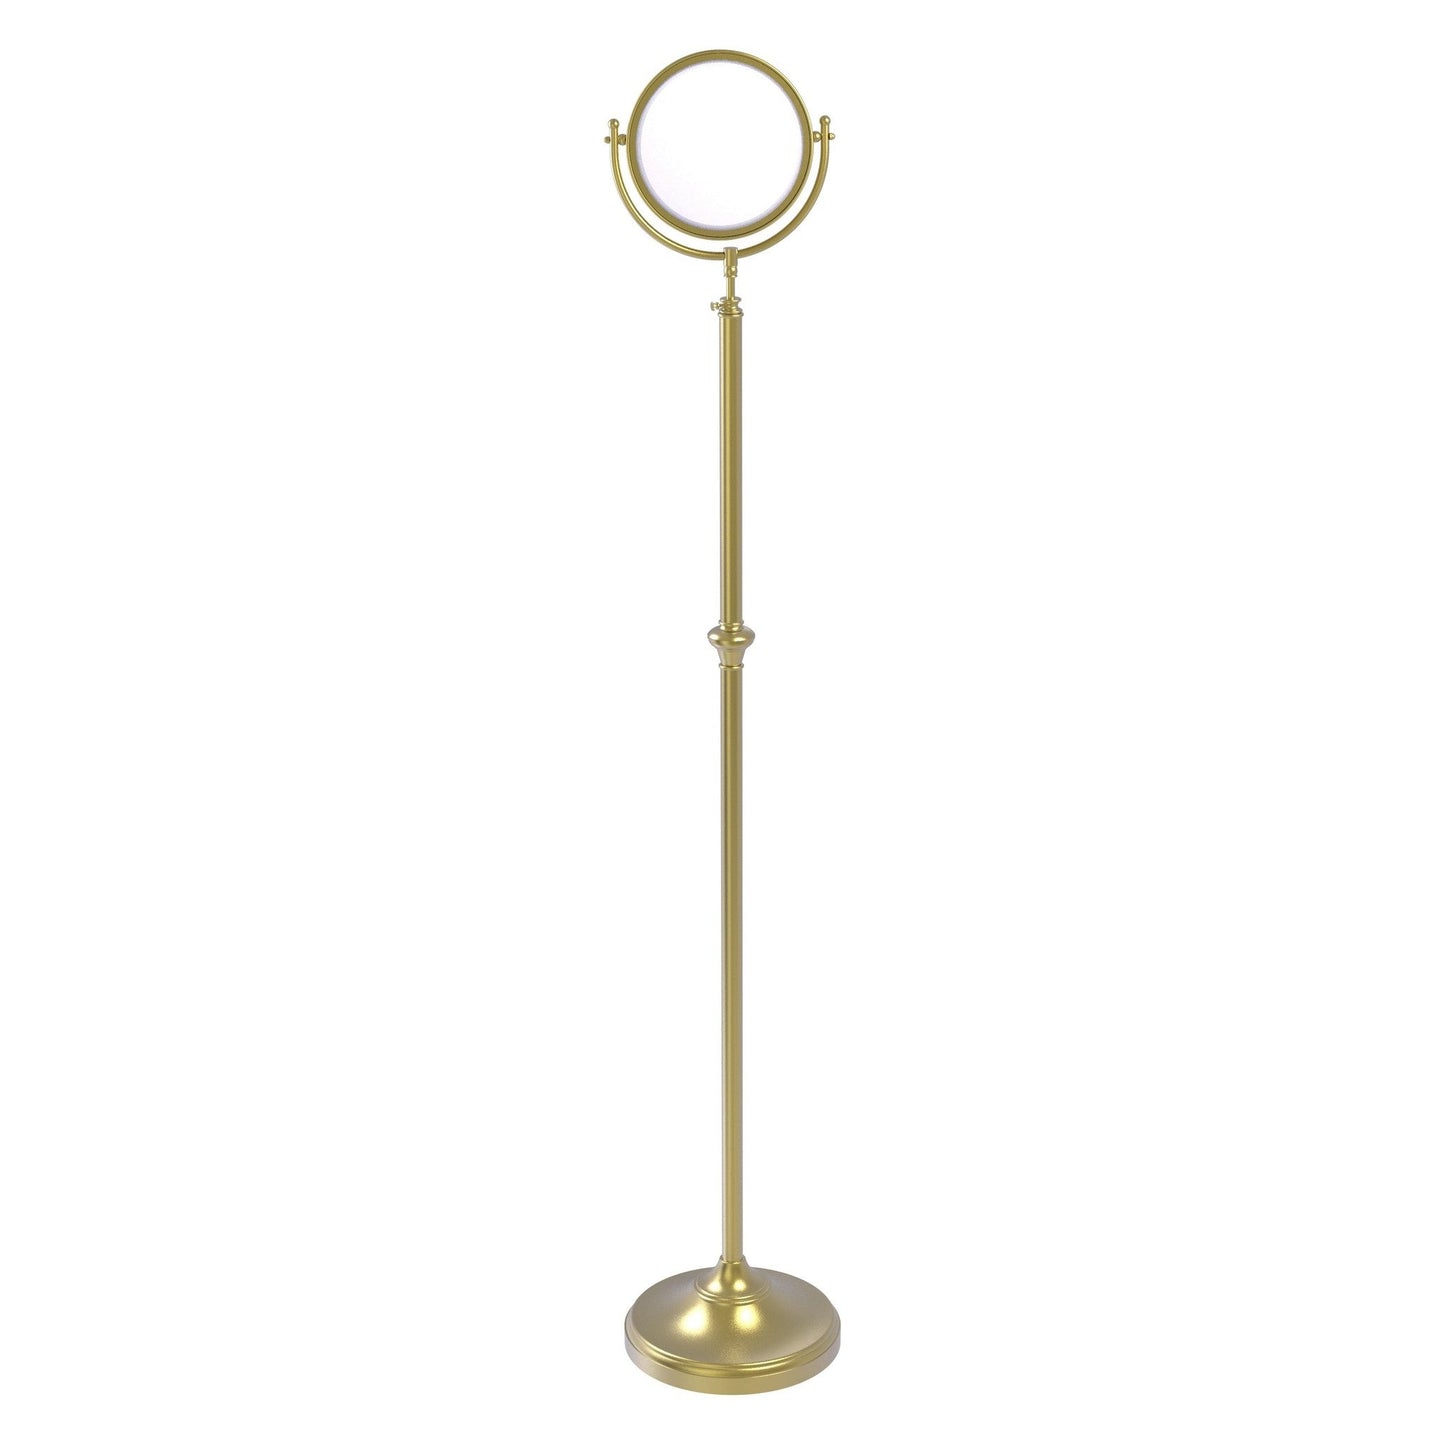 Allied Brass DMF-2/2X 10.5" x 10.5" Satin Brass Solid Brass Adjustable Height Floor Standing Make-Up Mirror With 2X Magnification